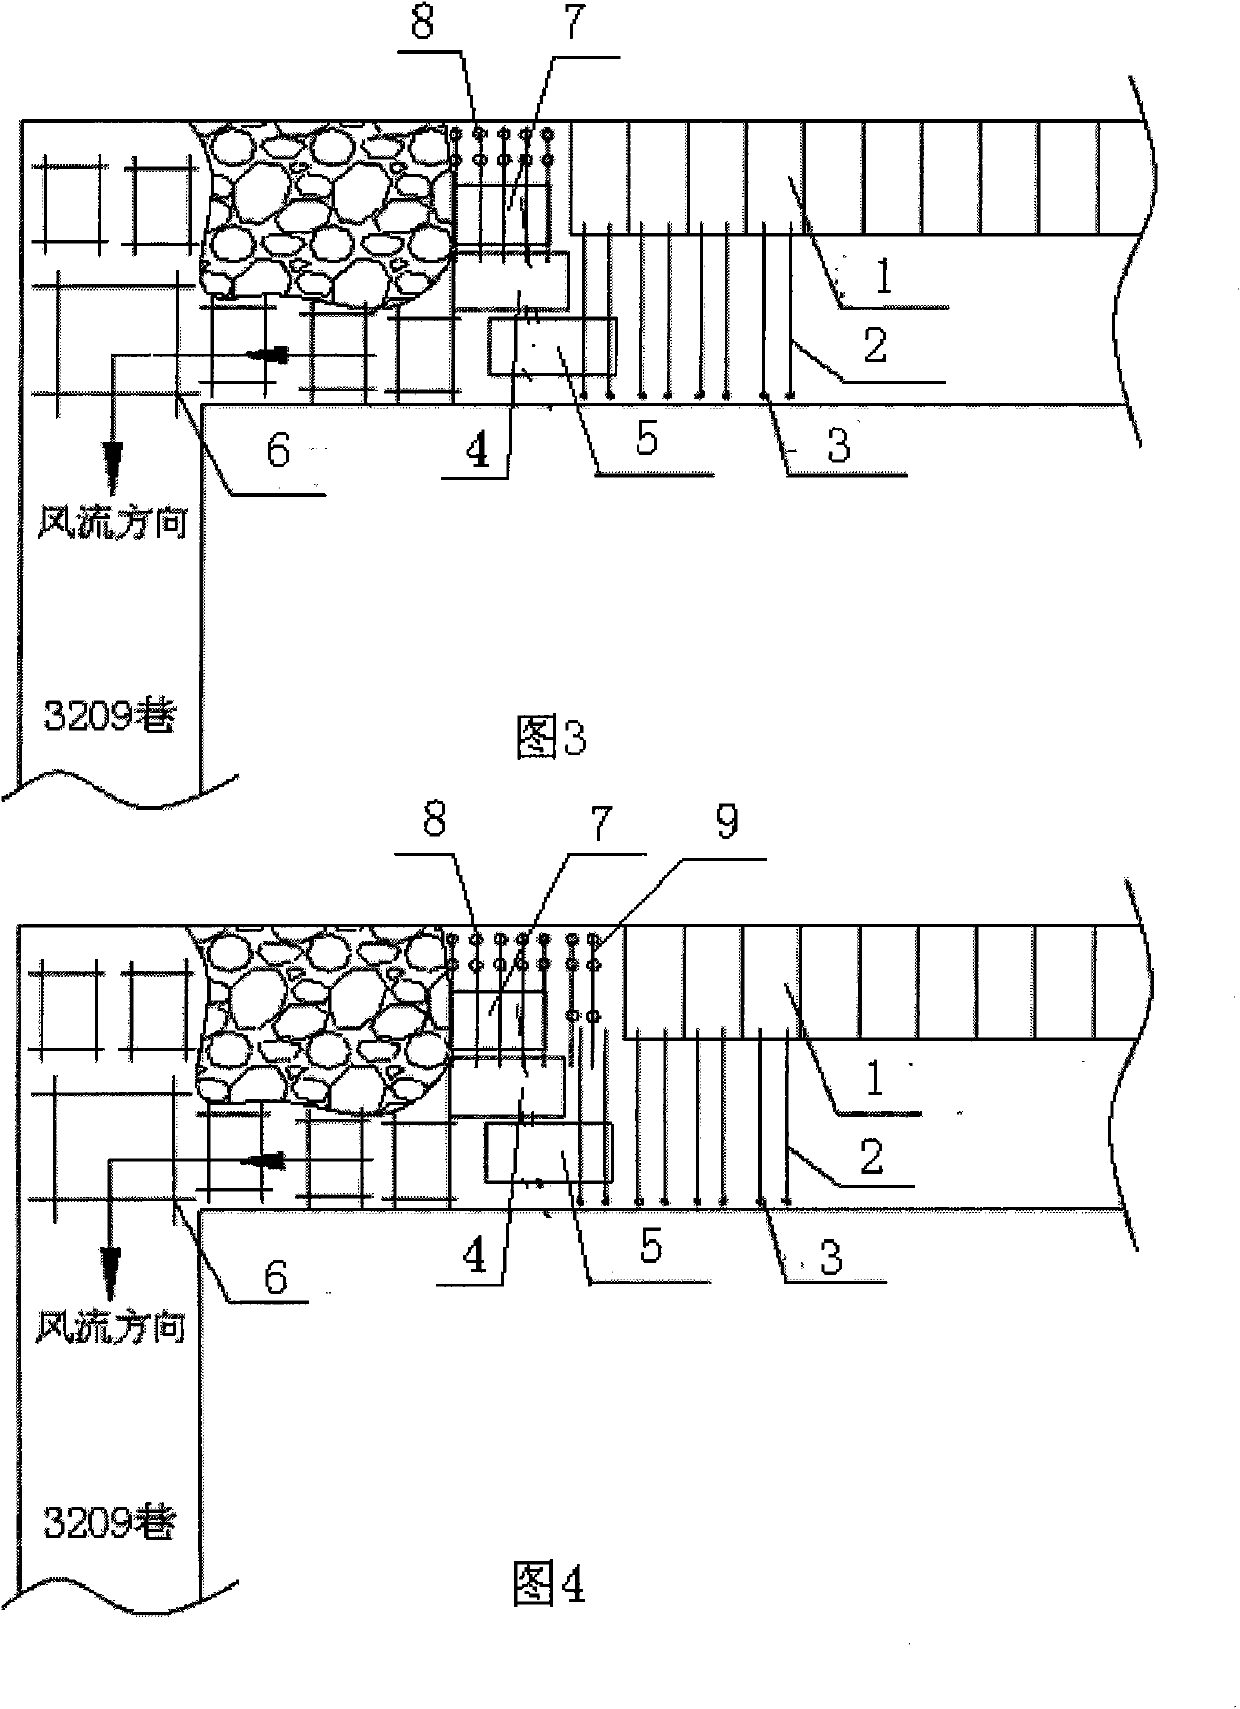 Method for supporting triangular area in coal mine support-dismantling process